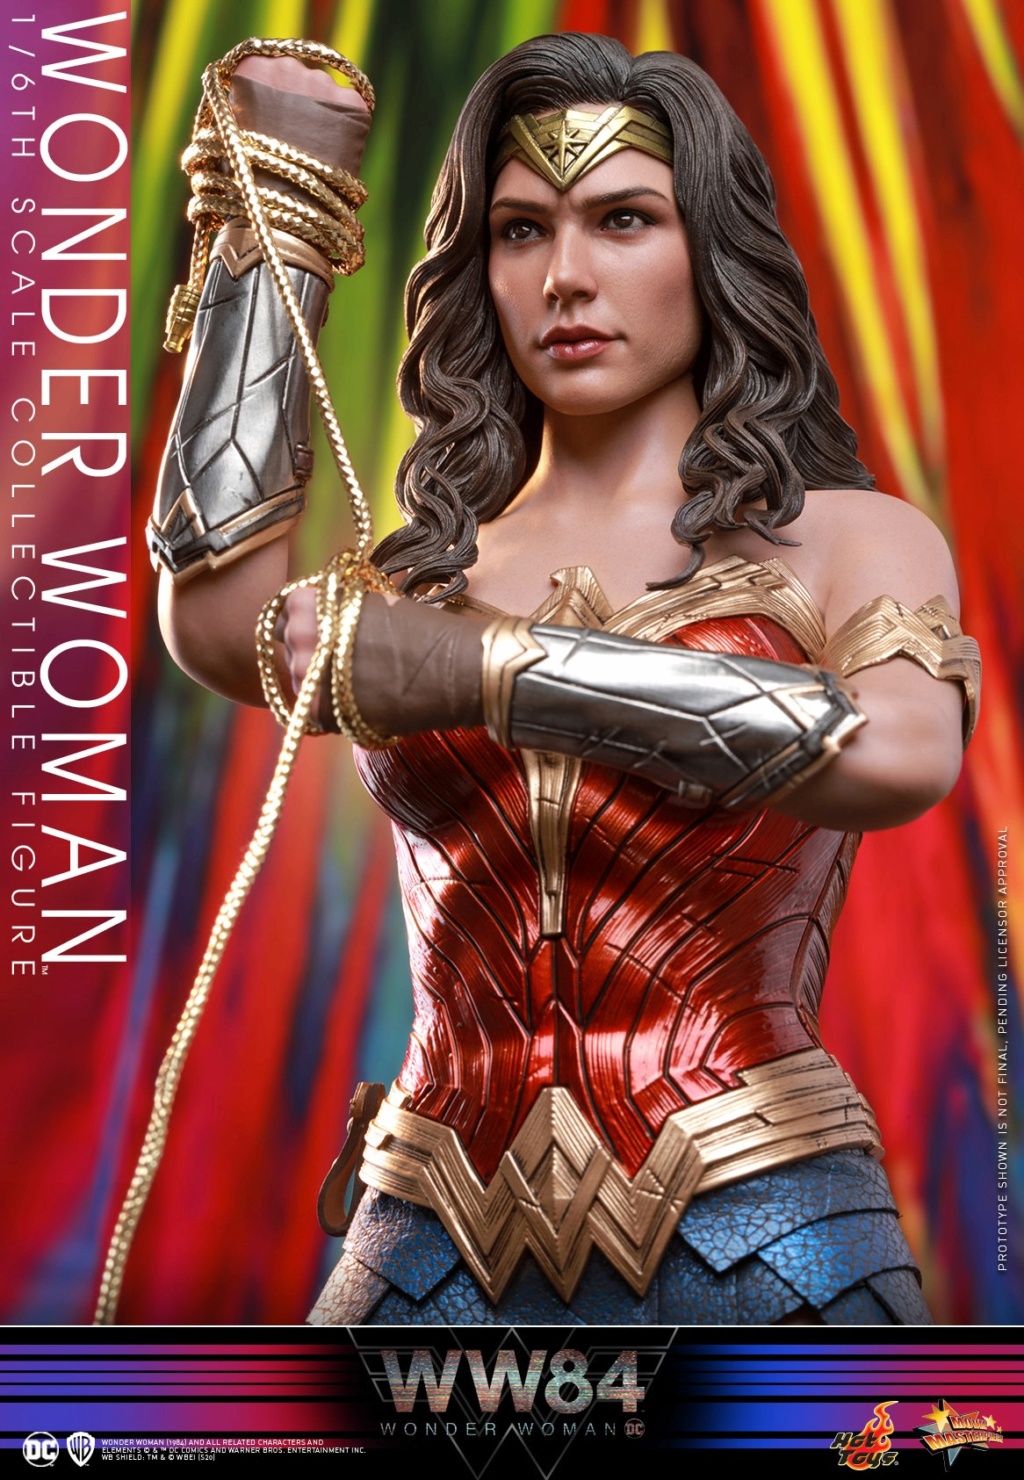 movie - NEW PRODUCT: HOT TOYS: WONDER WOMAN 1984 WONDER WOMAN 1/6TH SCALE COLLECTIBLE FIGURE 10284